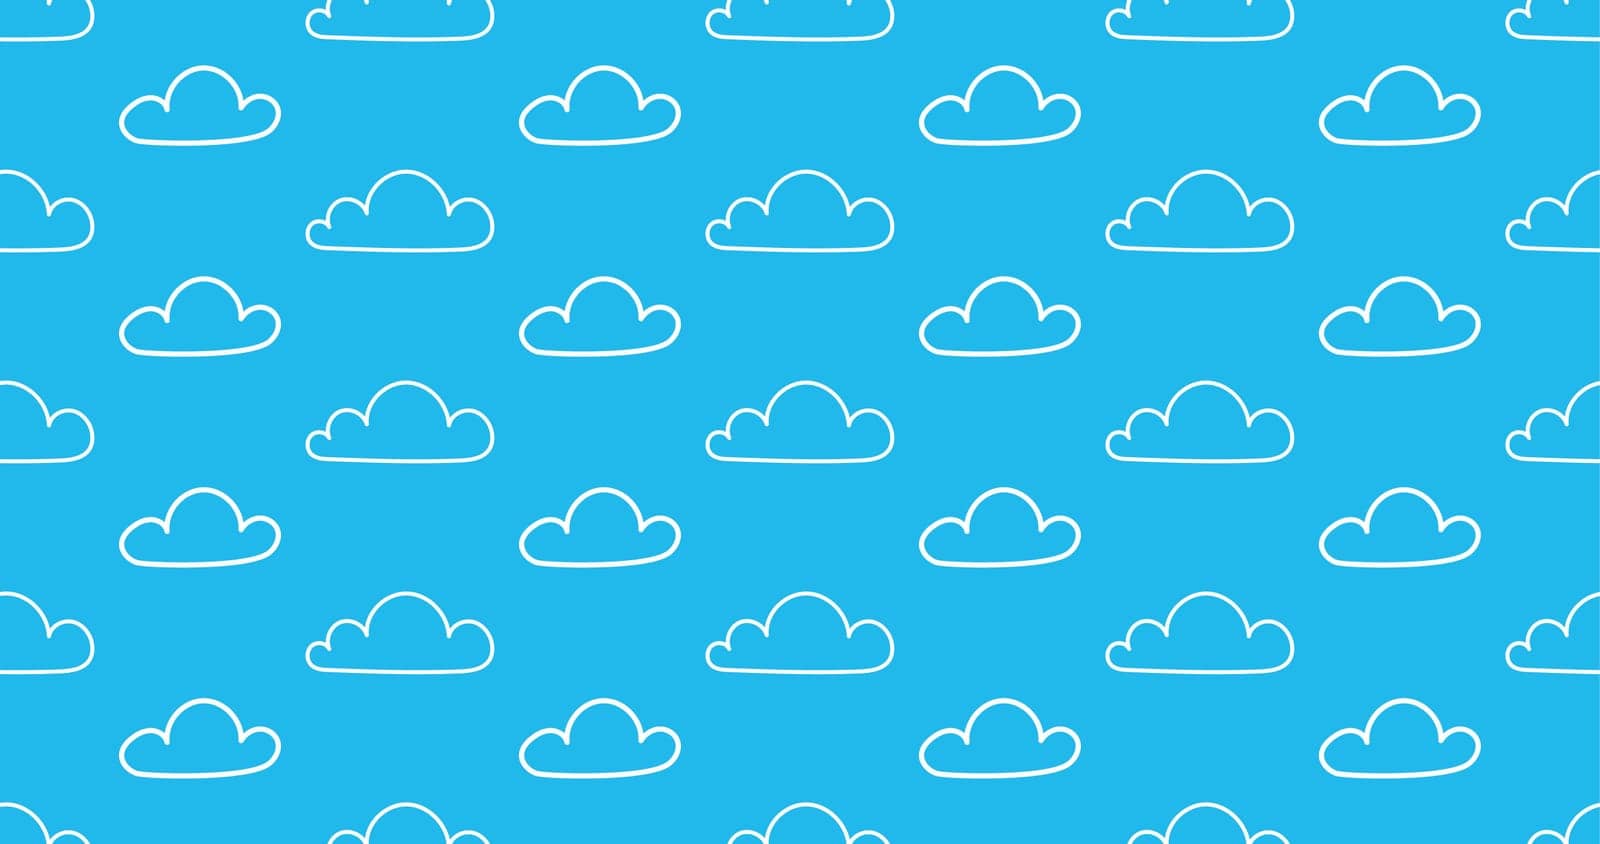 light blue sky white clouds pattern seamless vector background. Ornament can be used for gift wrapping paper, pattern fills, web page background